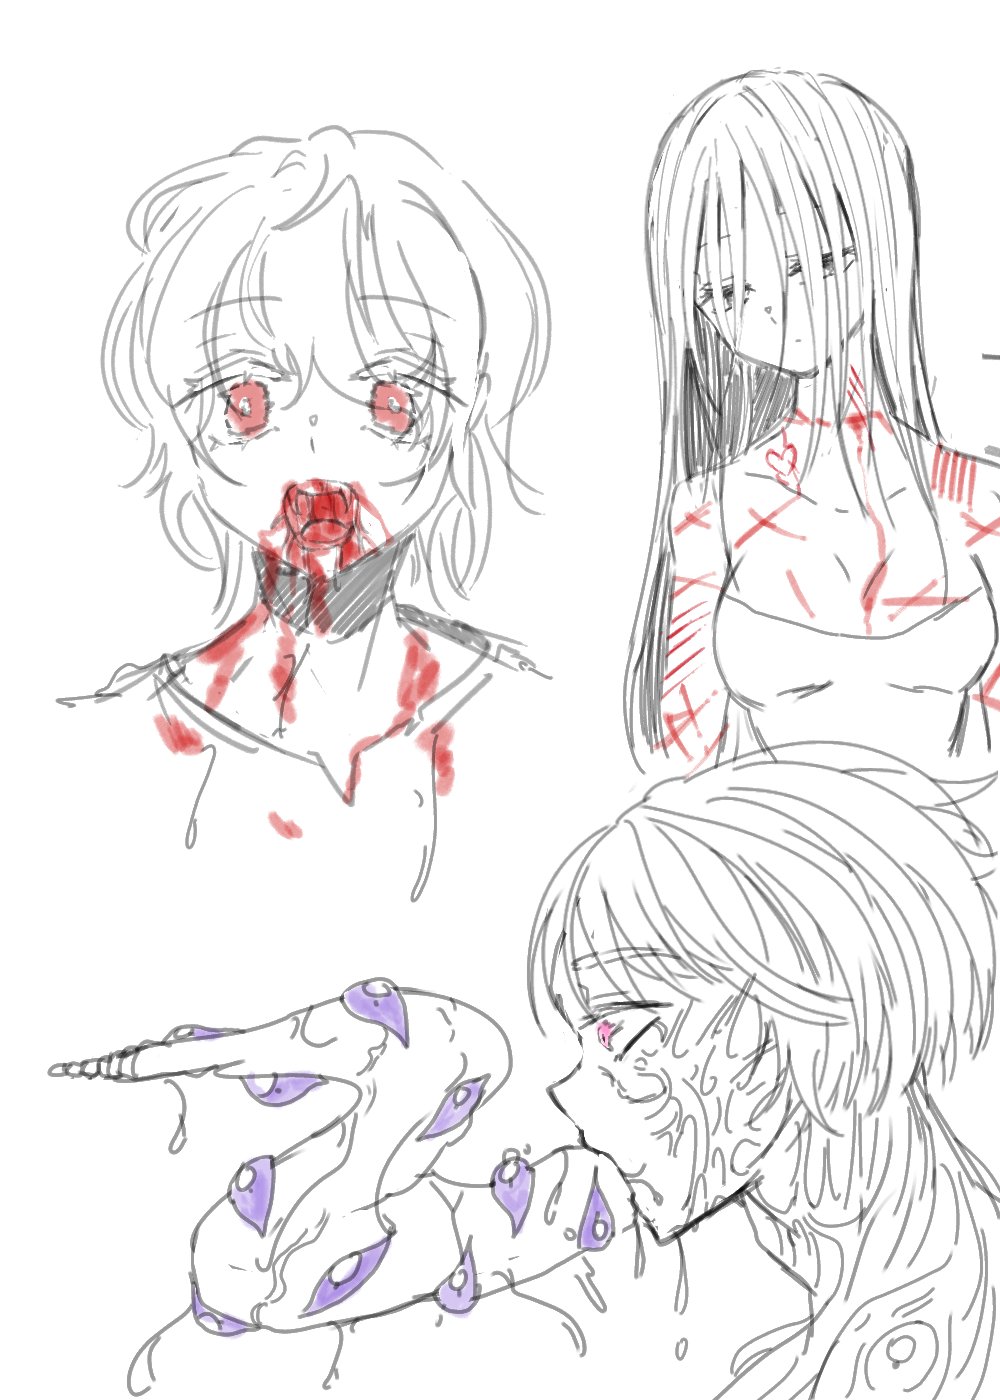 Yandere Character Base by Shadow-Rukario on DeviantArt | Drawing base,  Yandere characters, Drawing poses